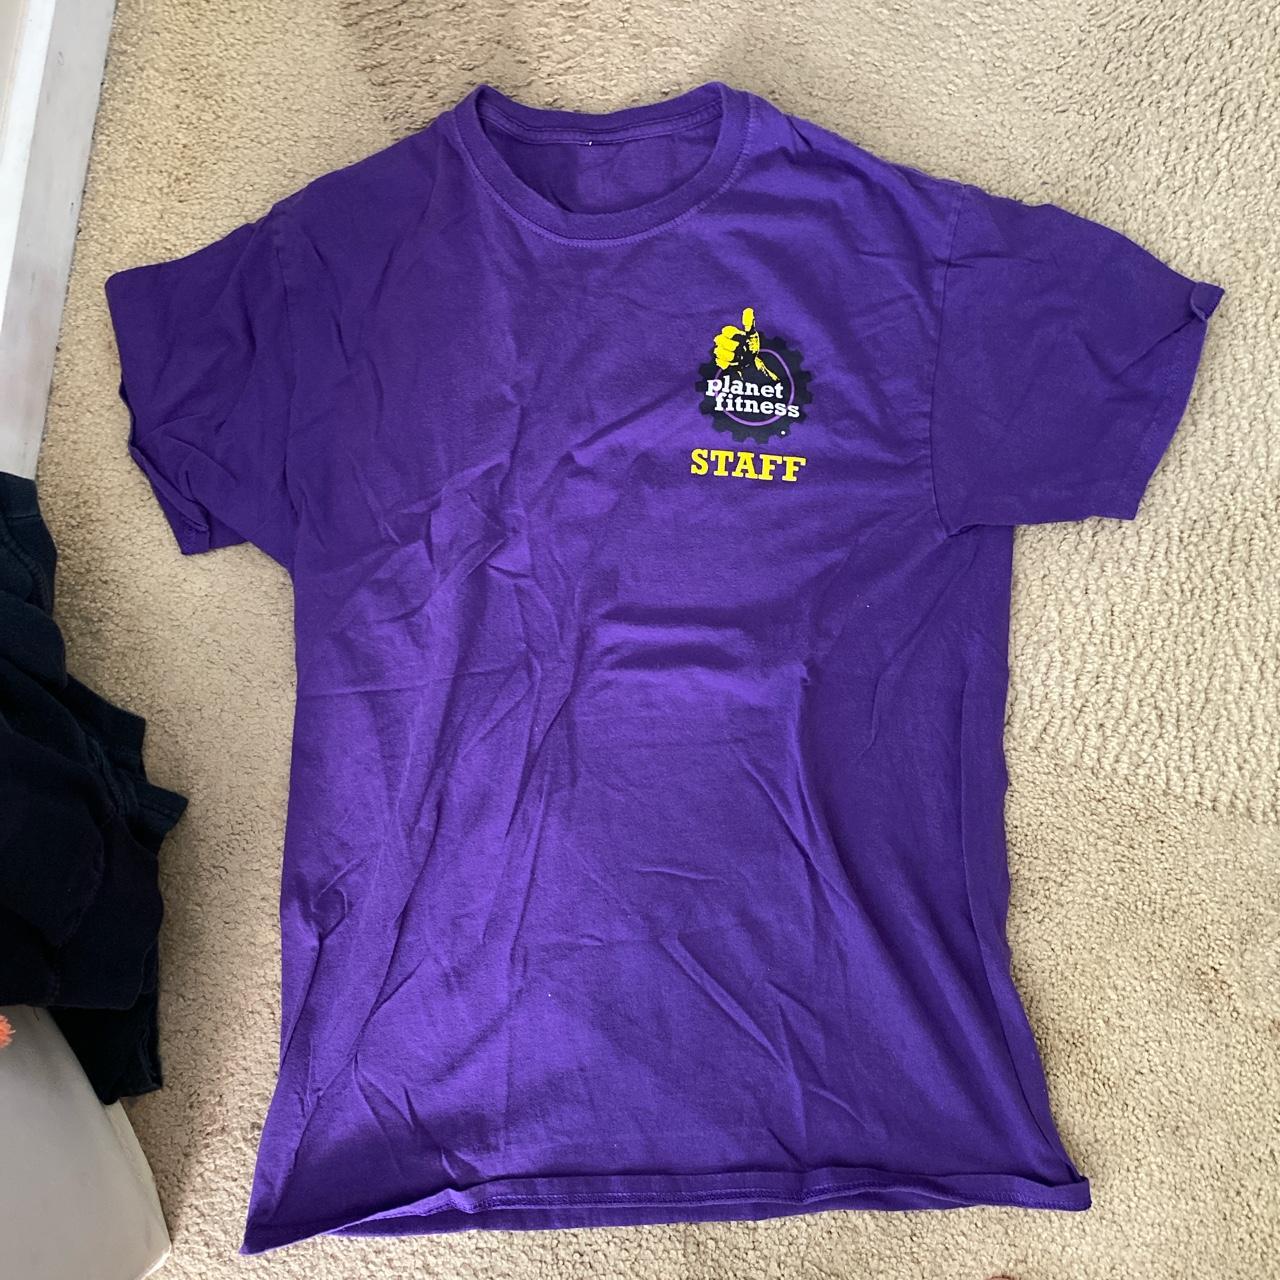 Planet fitness staff shirt I thrifted